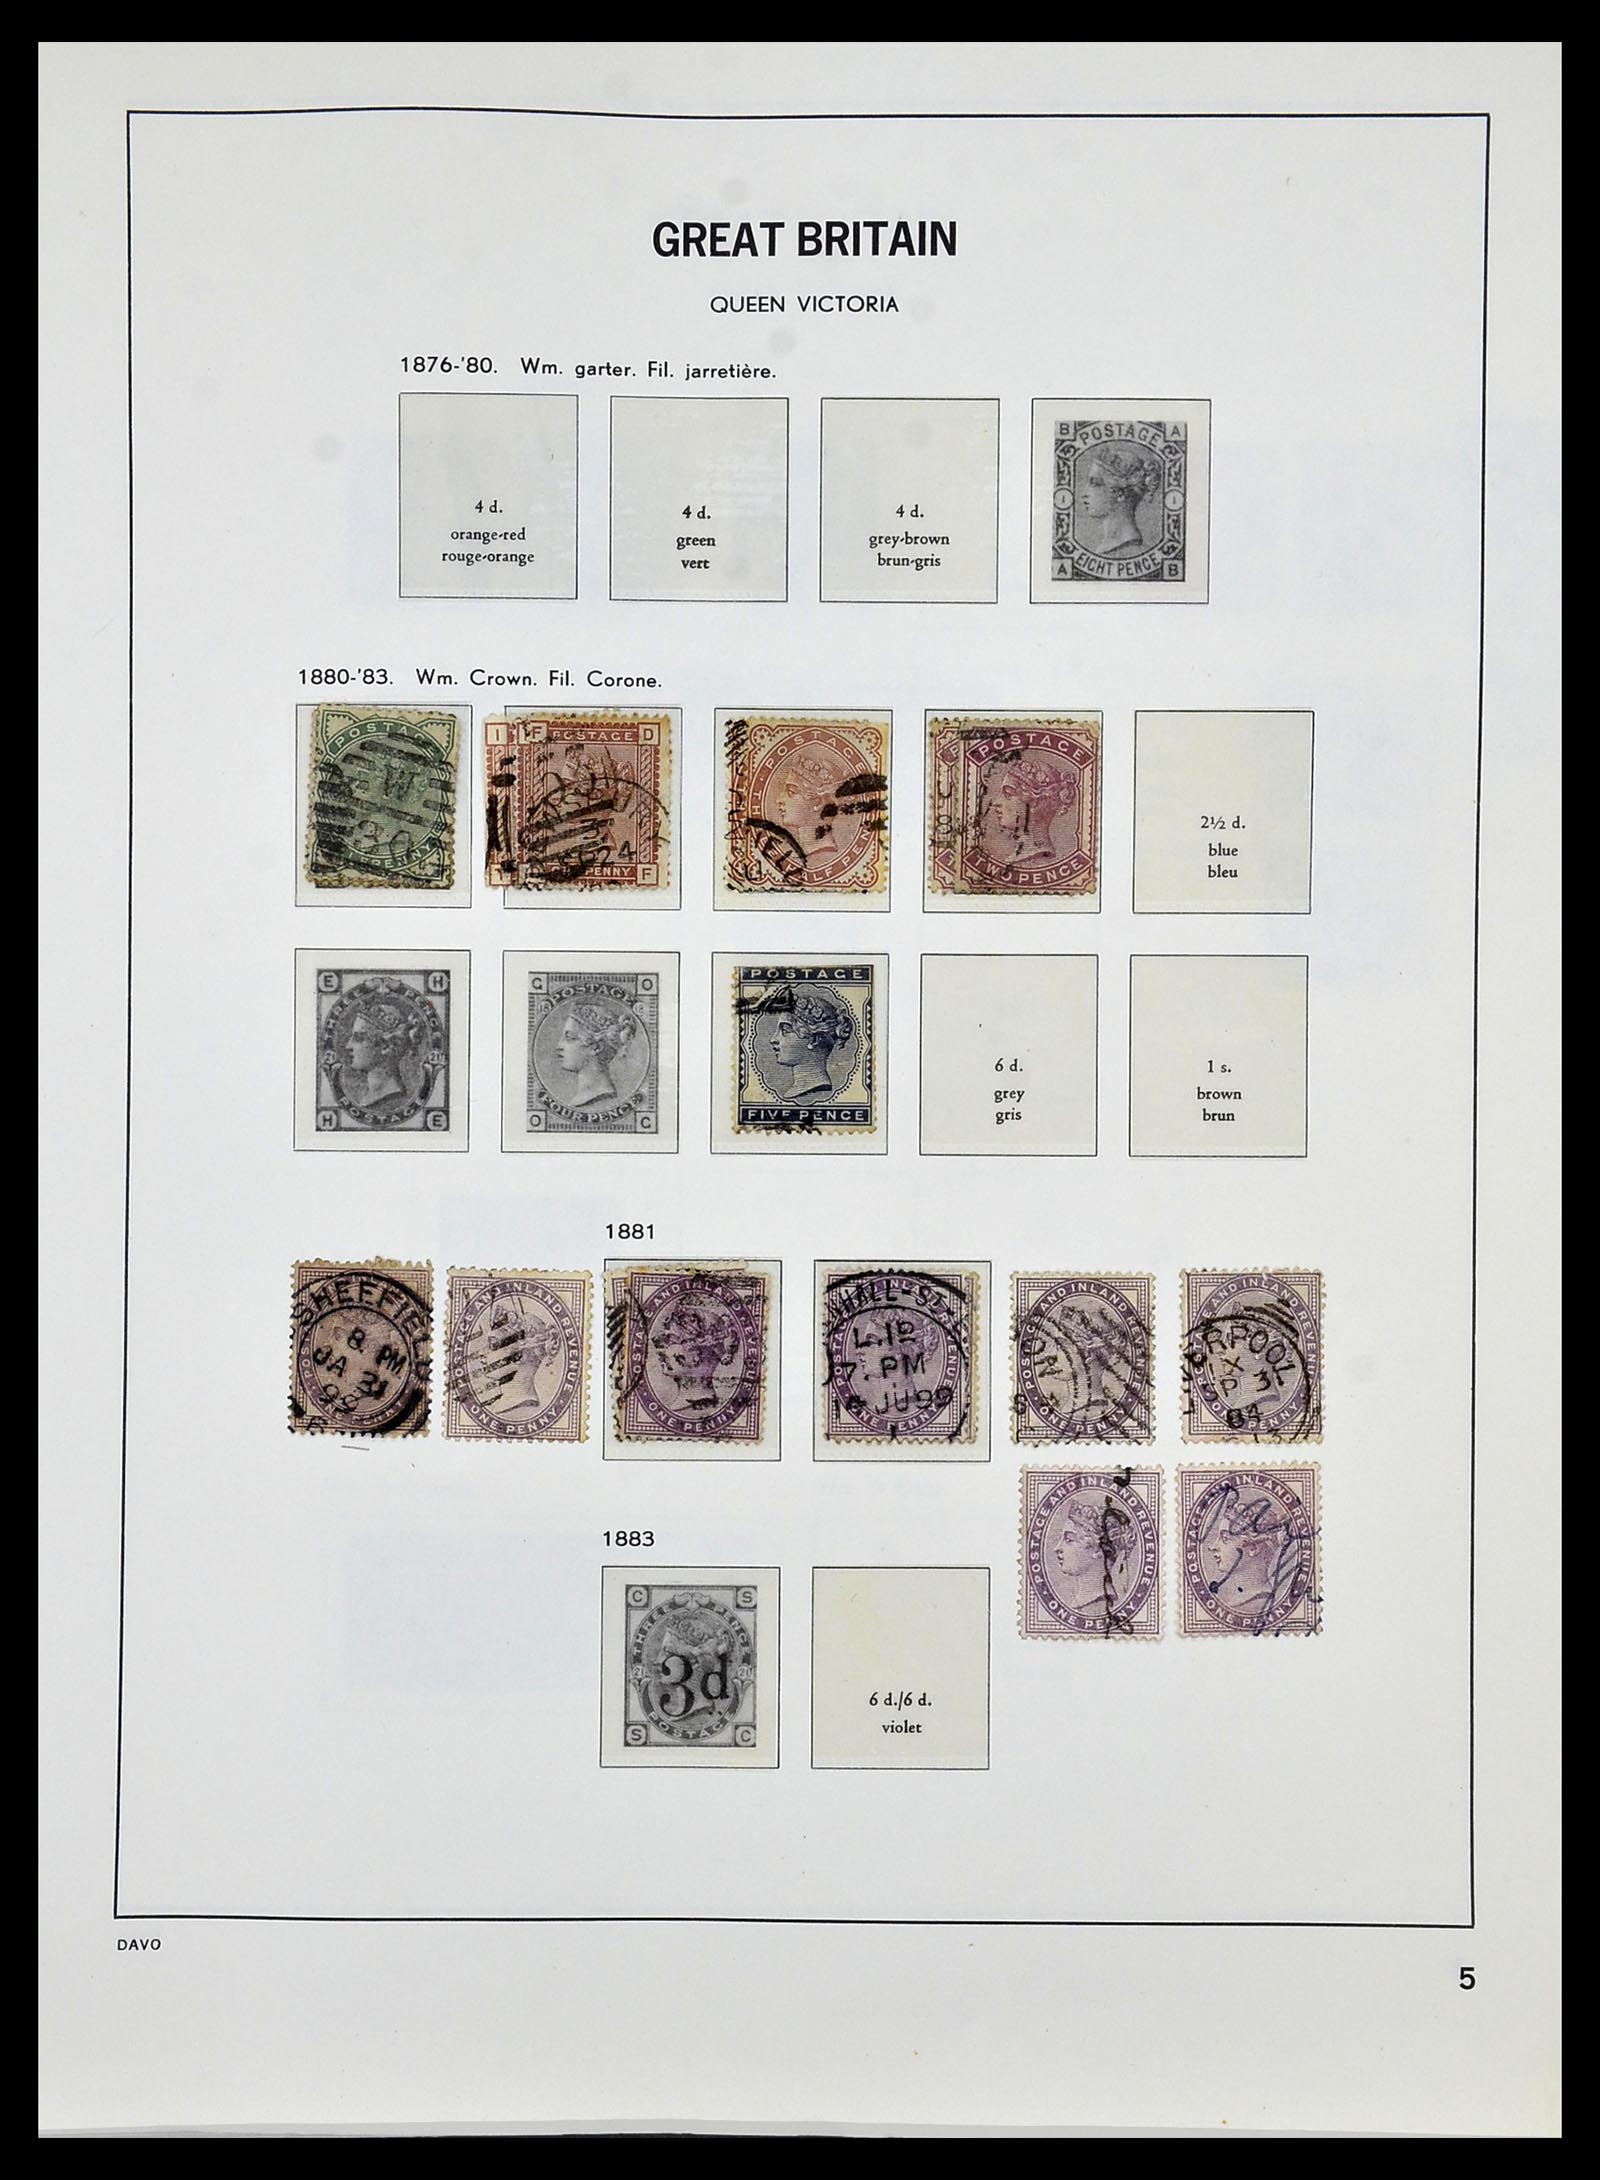 33999 004 - Stamp collection 33999 Great Britain 1841-2000.